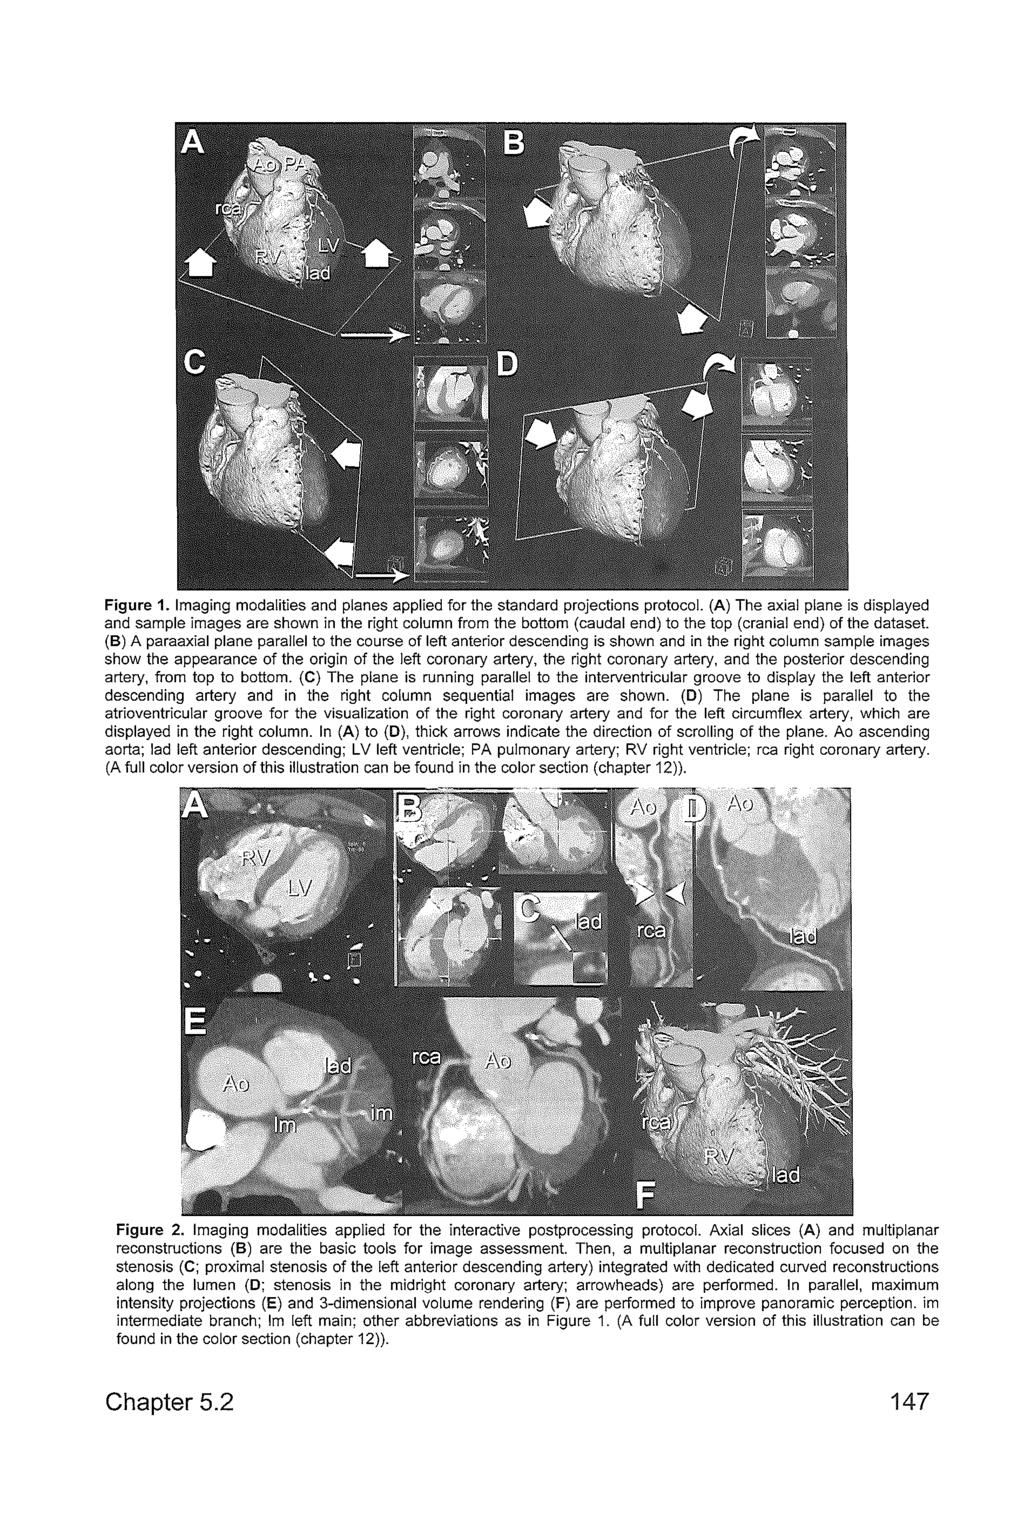 Figure 1. Imaging modalities and planes applied for the standard projections protocol.